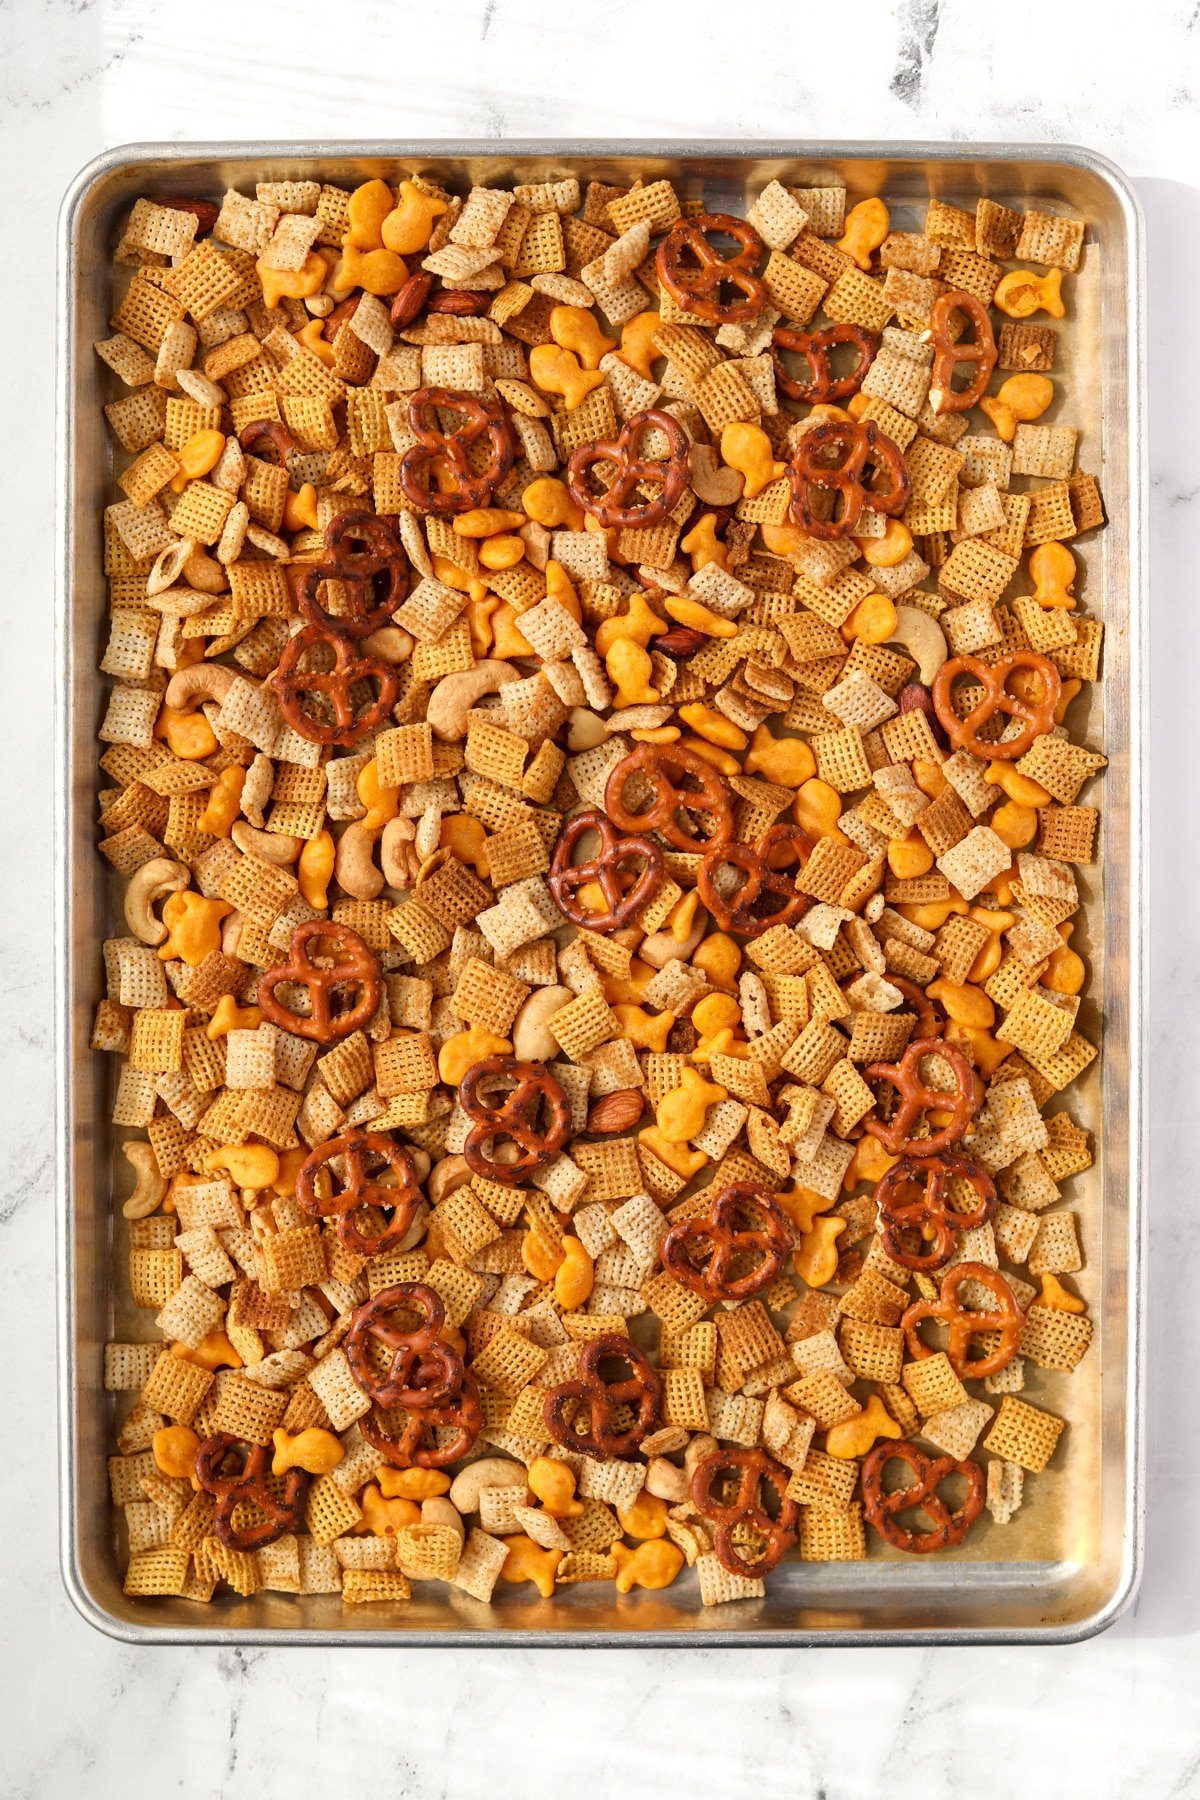 A baking pan with homemade snack mix on it.